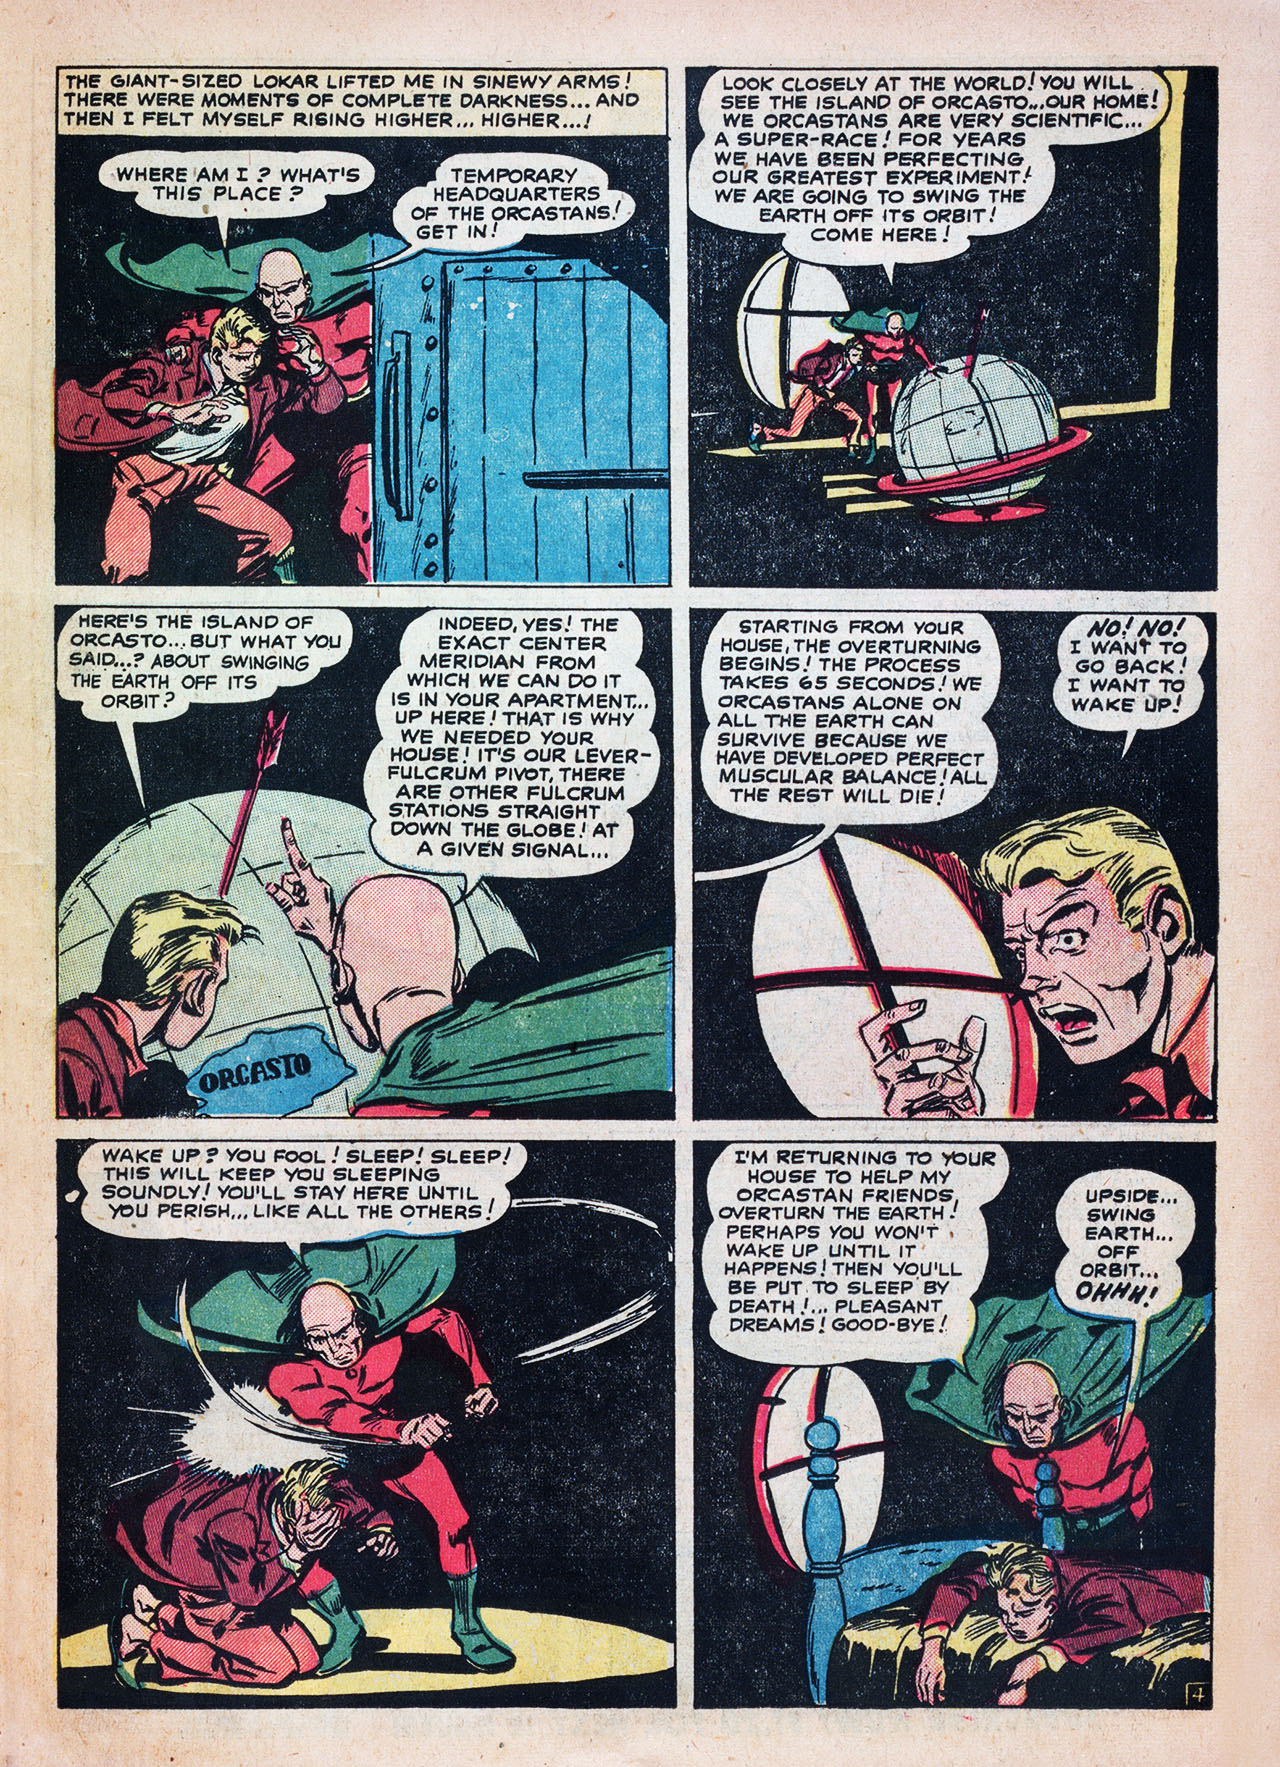 Marvel Tales (1949) 102 Page 14